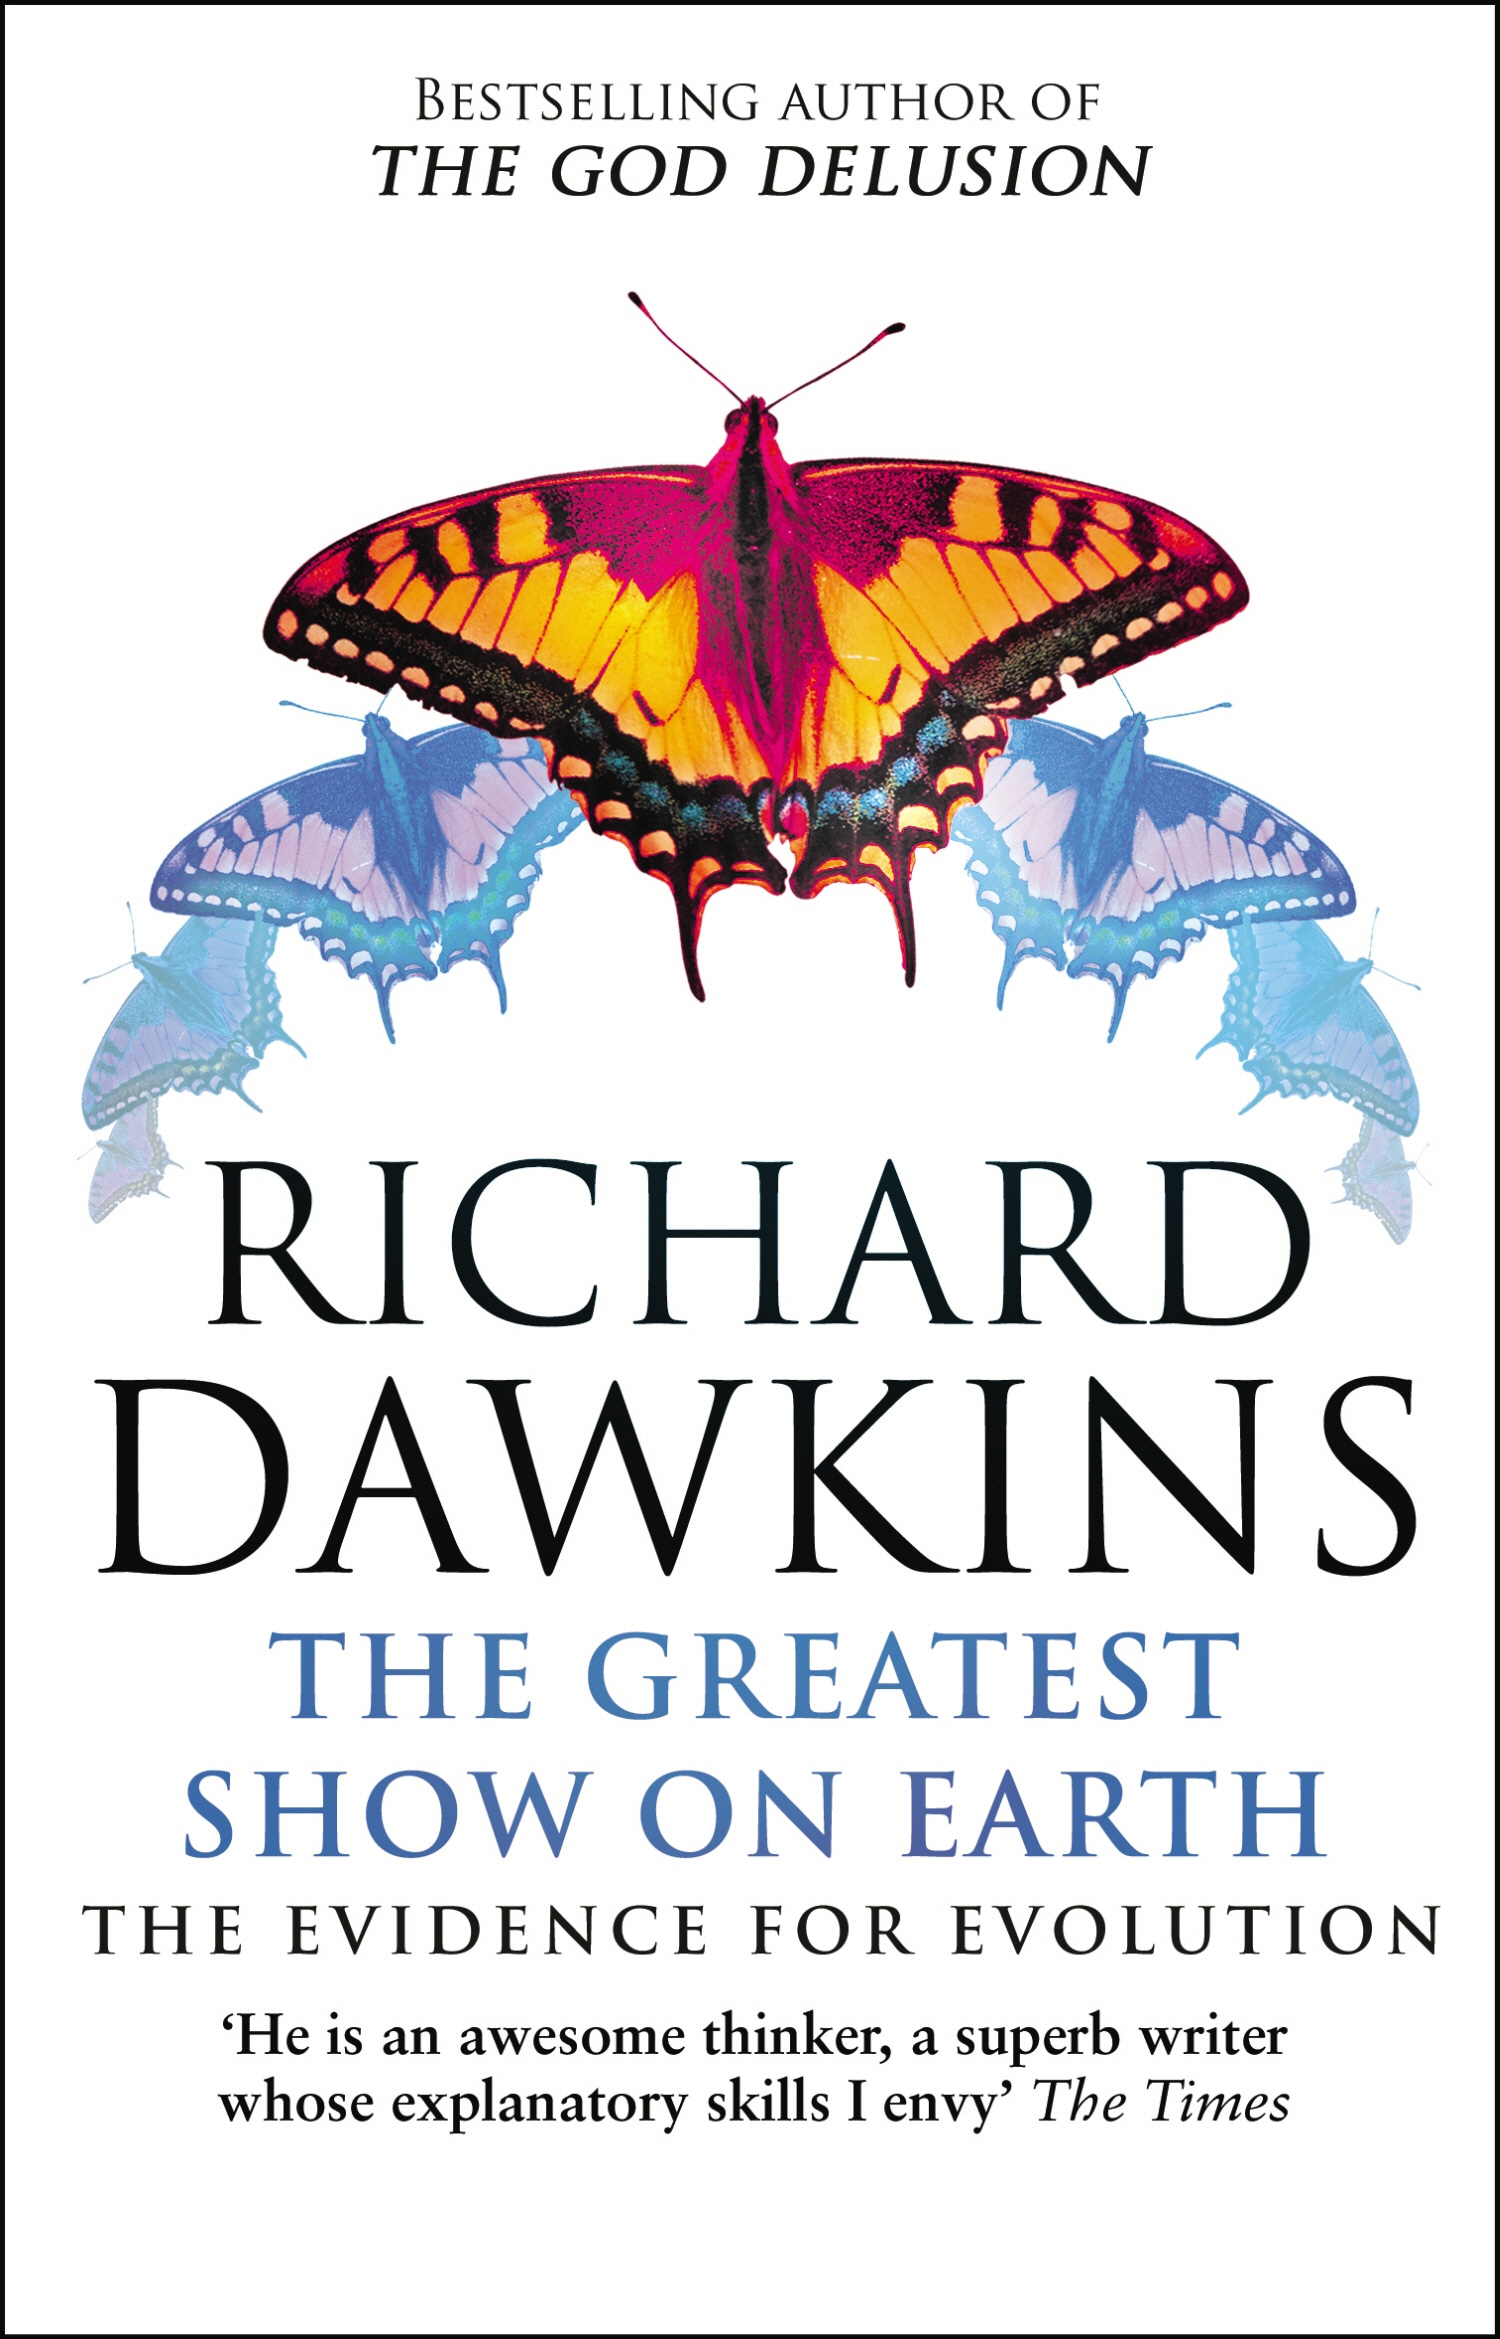 Book “The Greatest Show on Earth” by Richard Dawkins — April 29, 2010